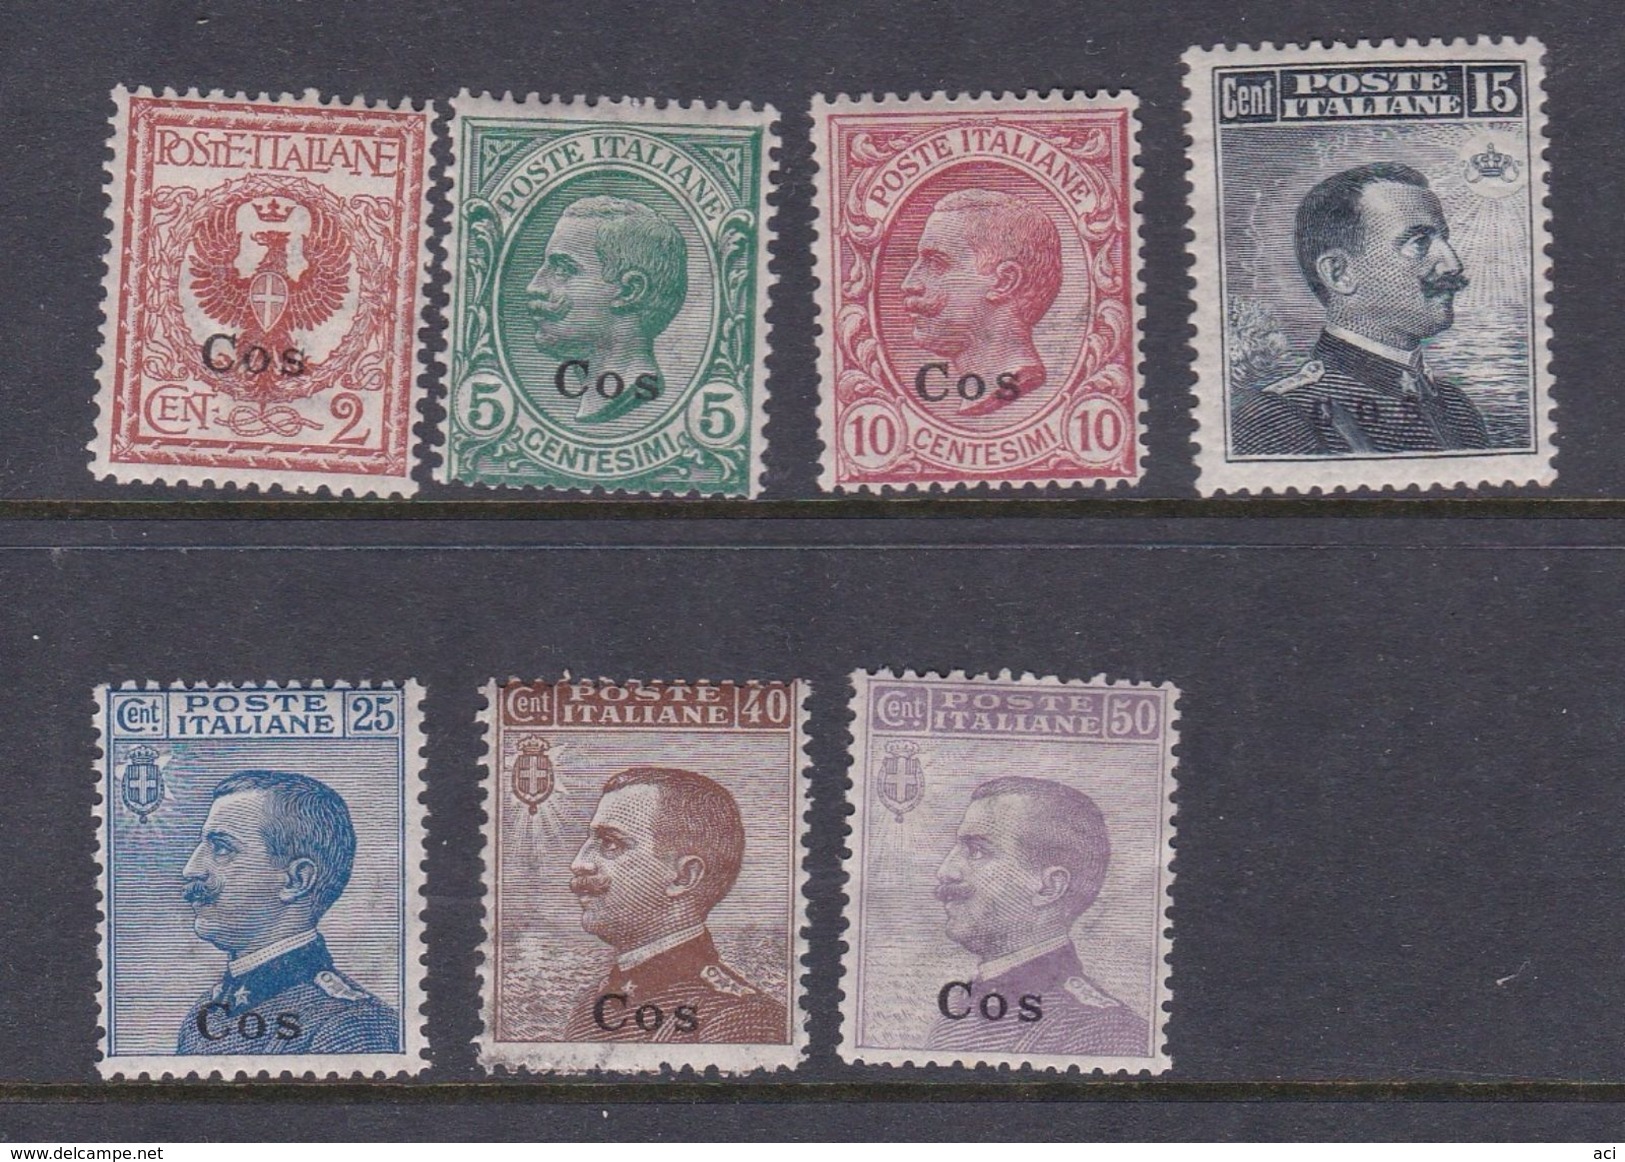 Italy-Colonies And Territories-Aegean-Coo S 1-7  1912 Set, Mint Hinged - Aegean (Coo)